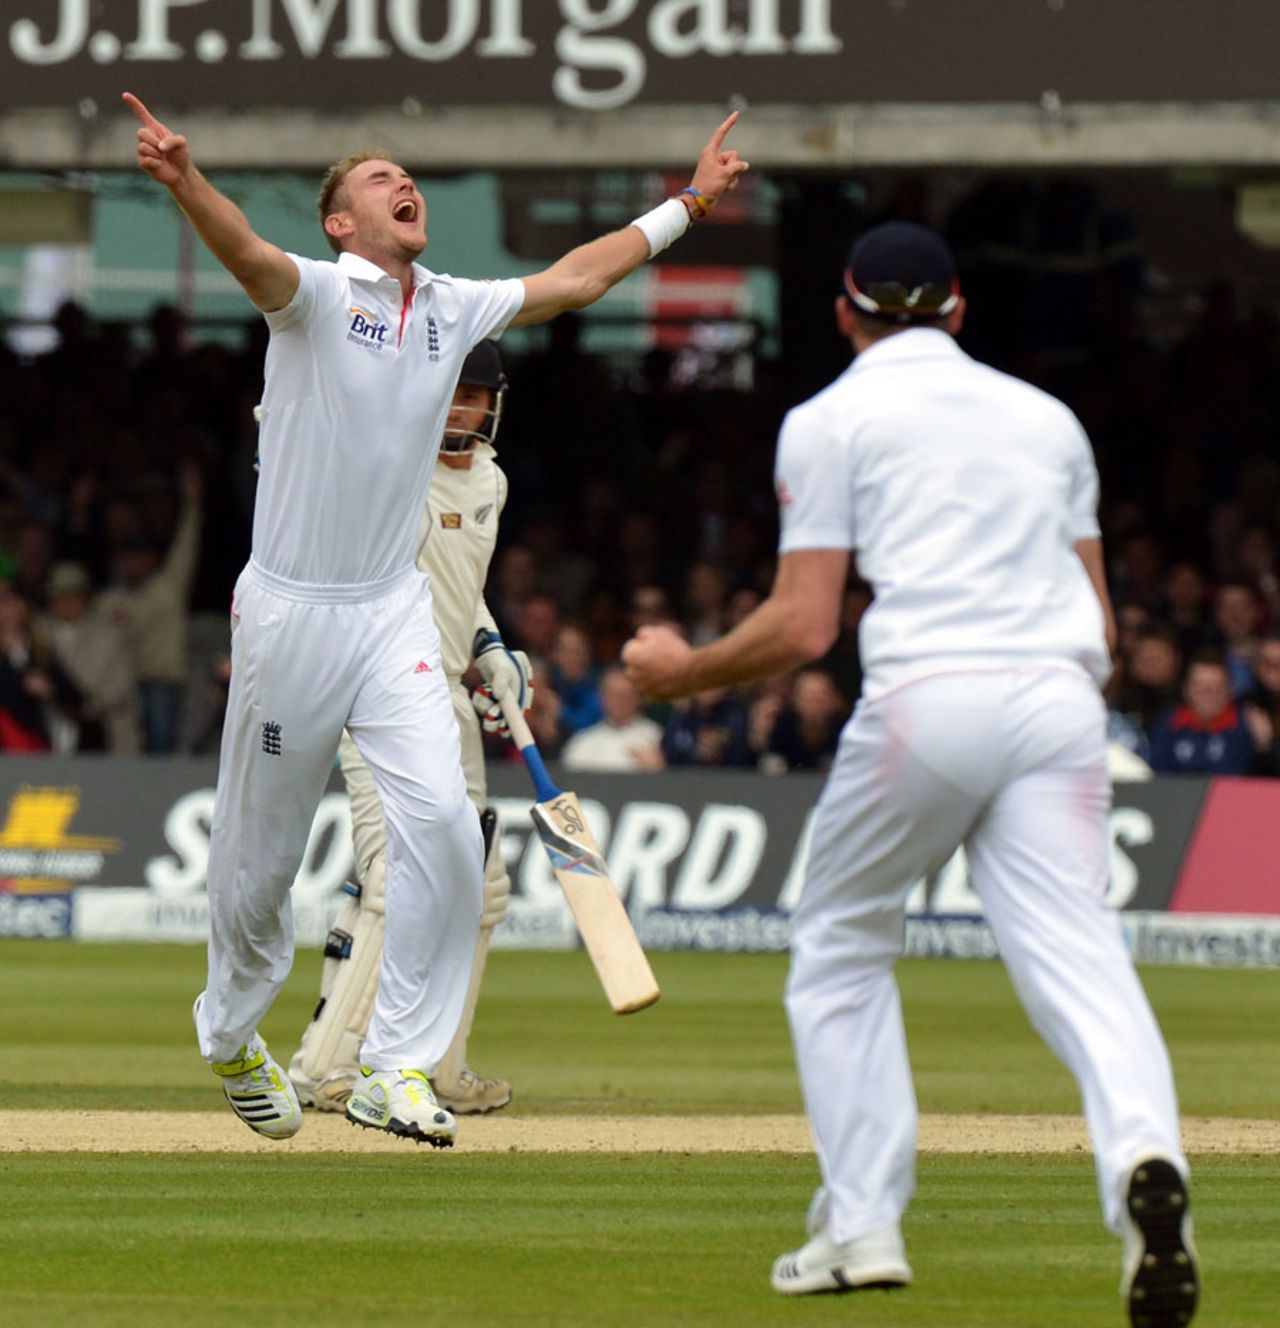 Stuart Broad's removed Brendon McCullum to complete a five-wicket haul before lunch, England v New Zealand, 1st Investec Test, Lord's, 4th day, May 19, 2013